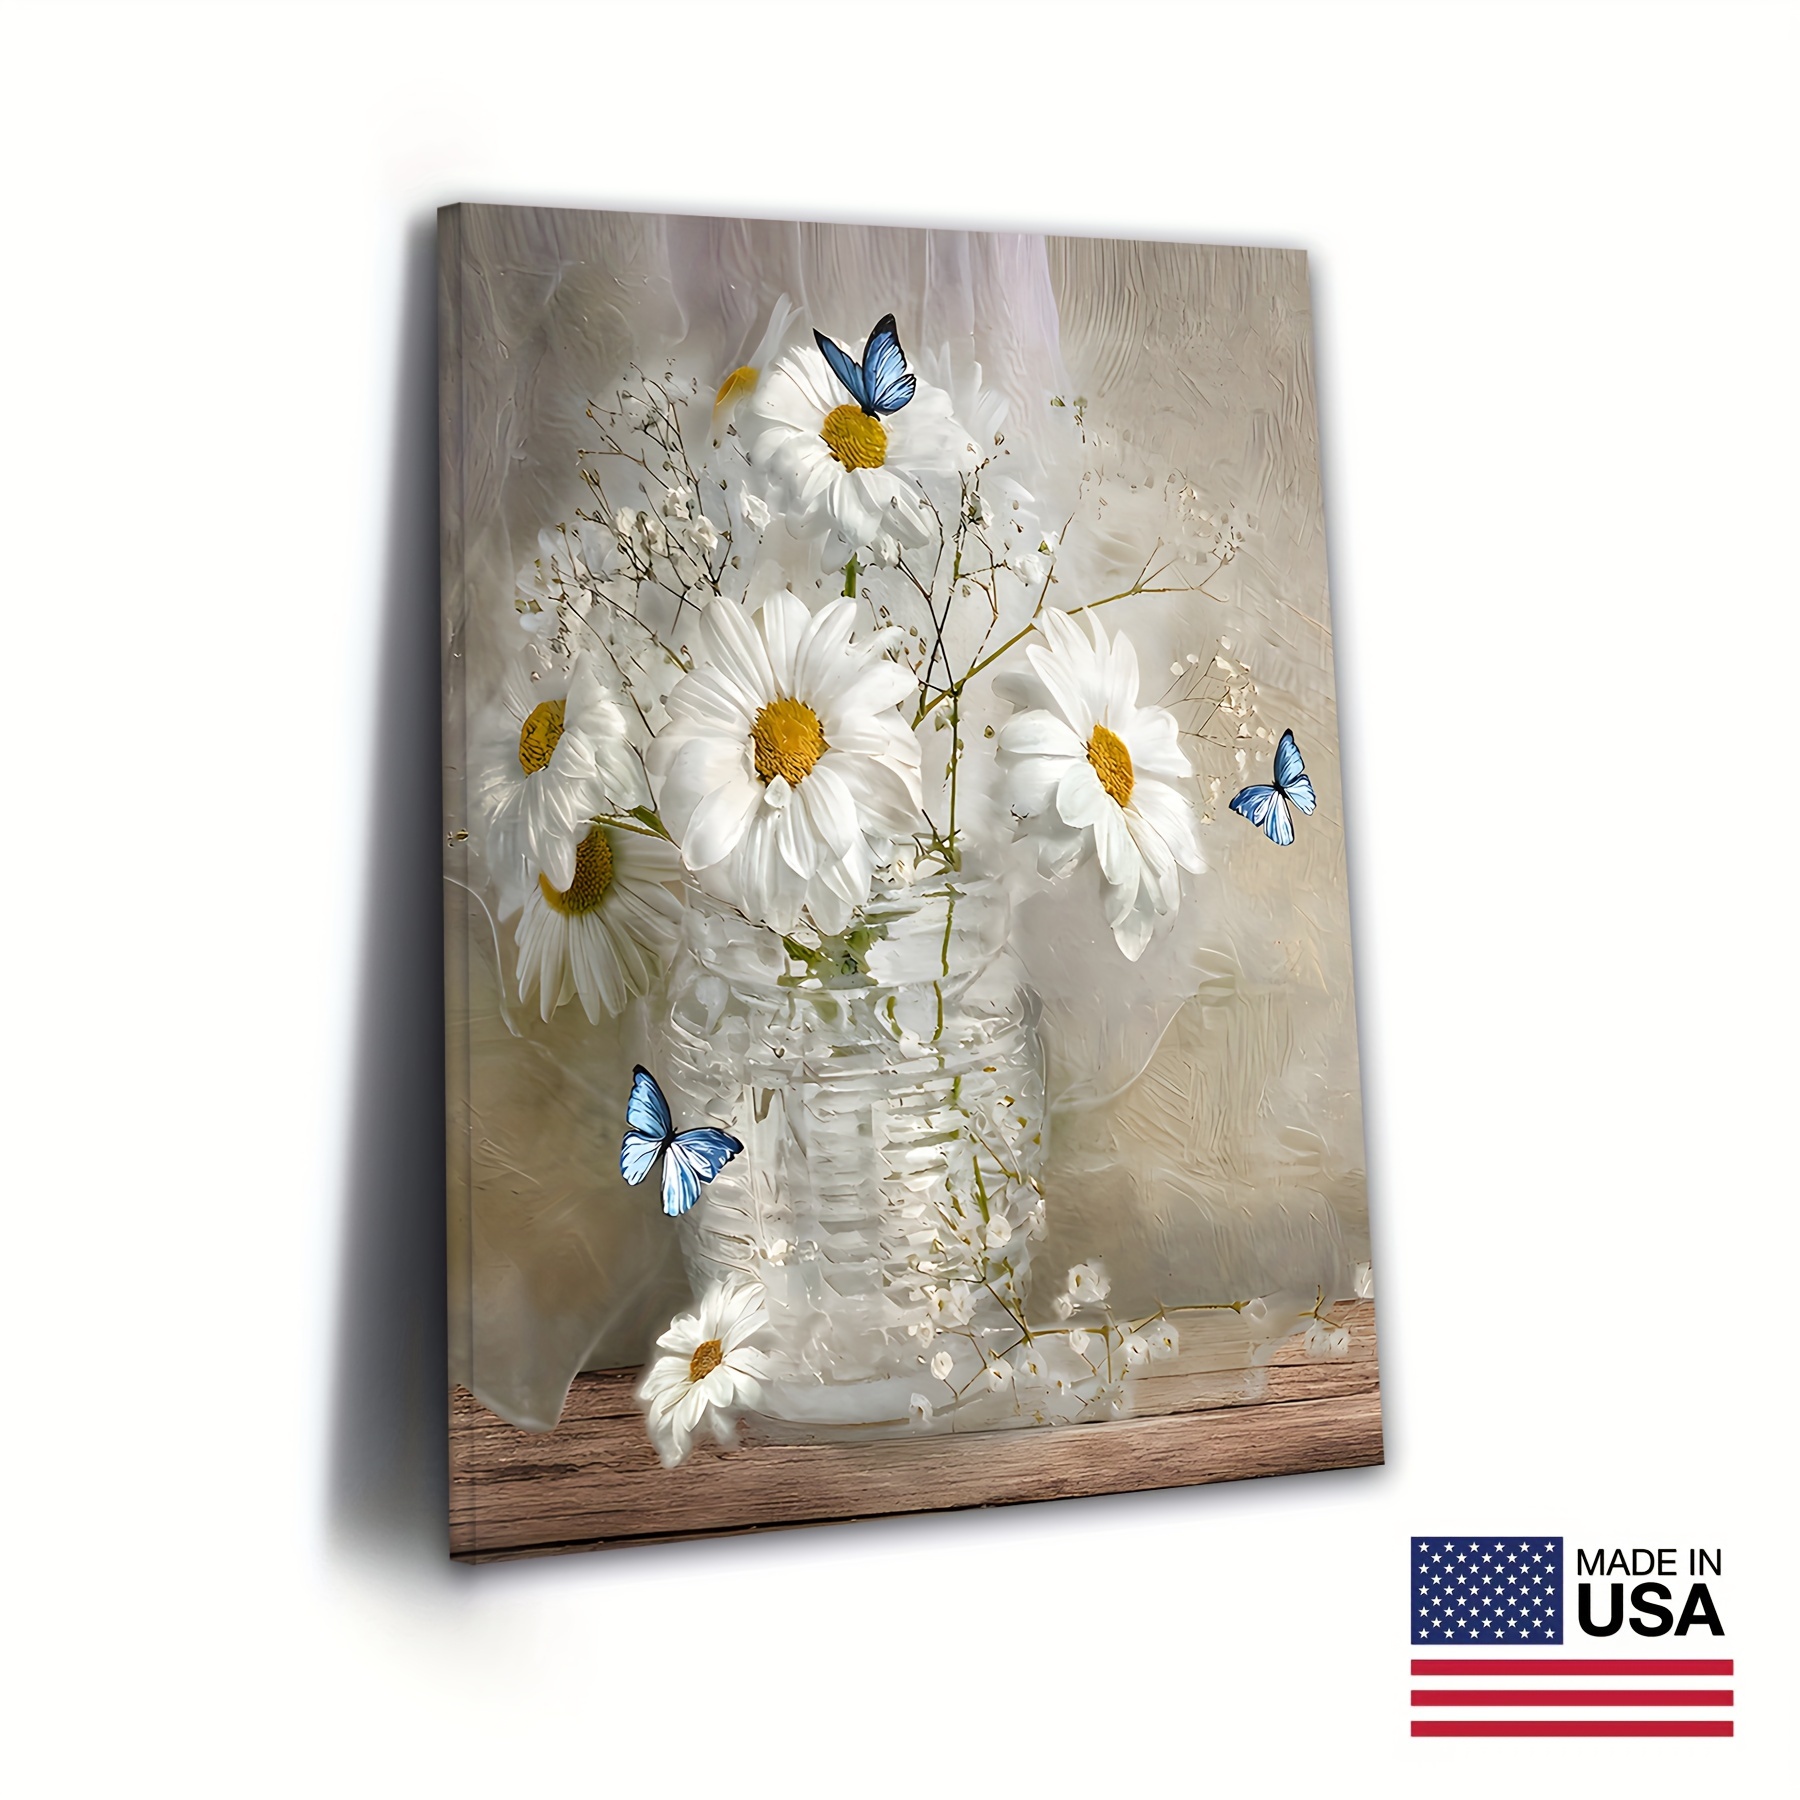 

1pc Wooden Framed Rustic Bathroom Decor Daisies Flower Wall Art Canvas Country Rustic White Flowers Blue Butterfly Canvas Prints For Kitchen Home Office Decoration, Canvas Frame